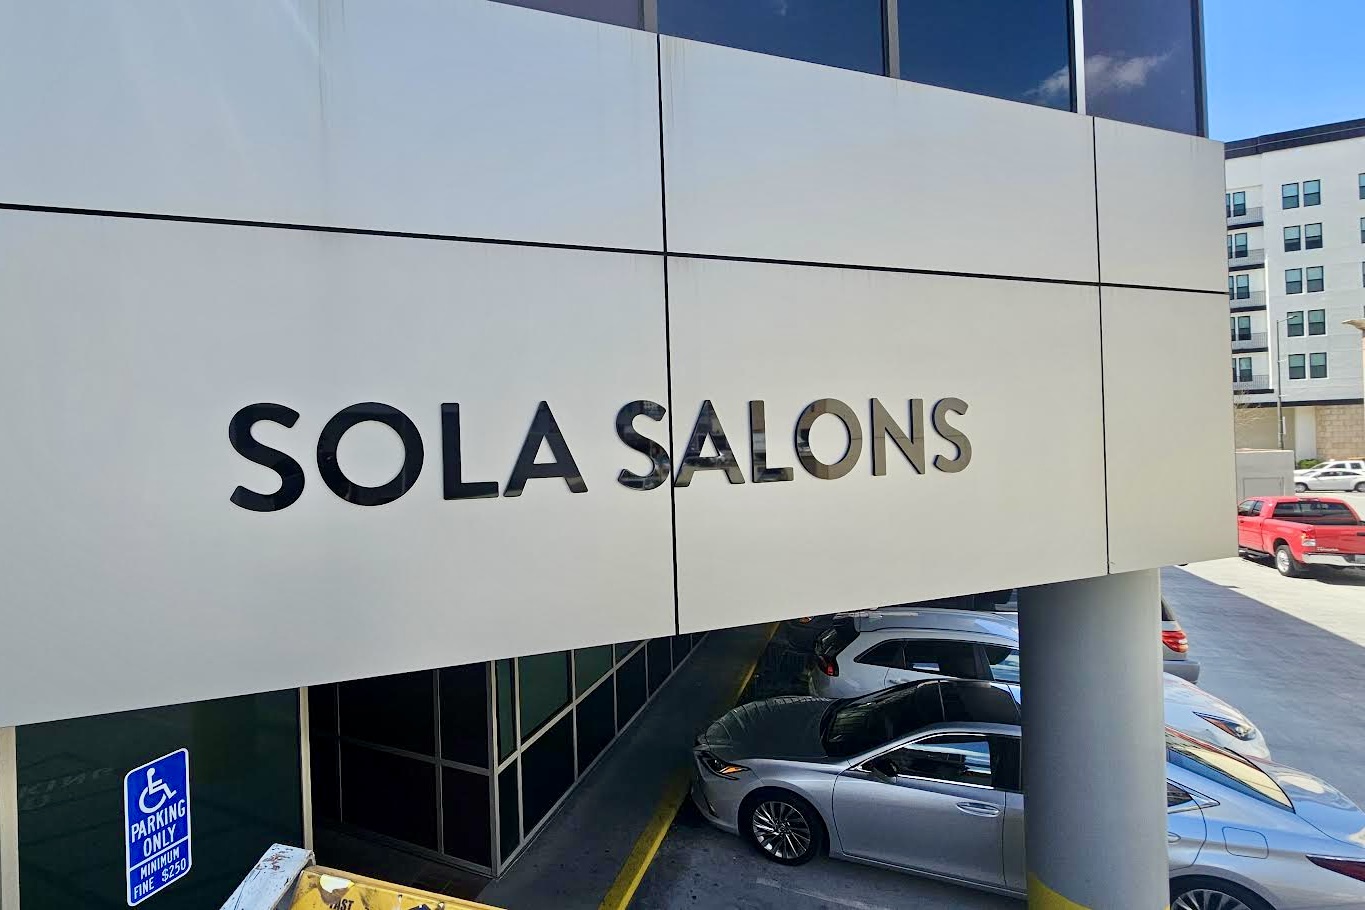 Sleek black dimensional letters spelling out "Sola Salons" on a cream background.